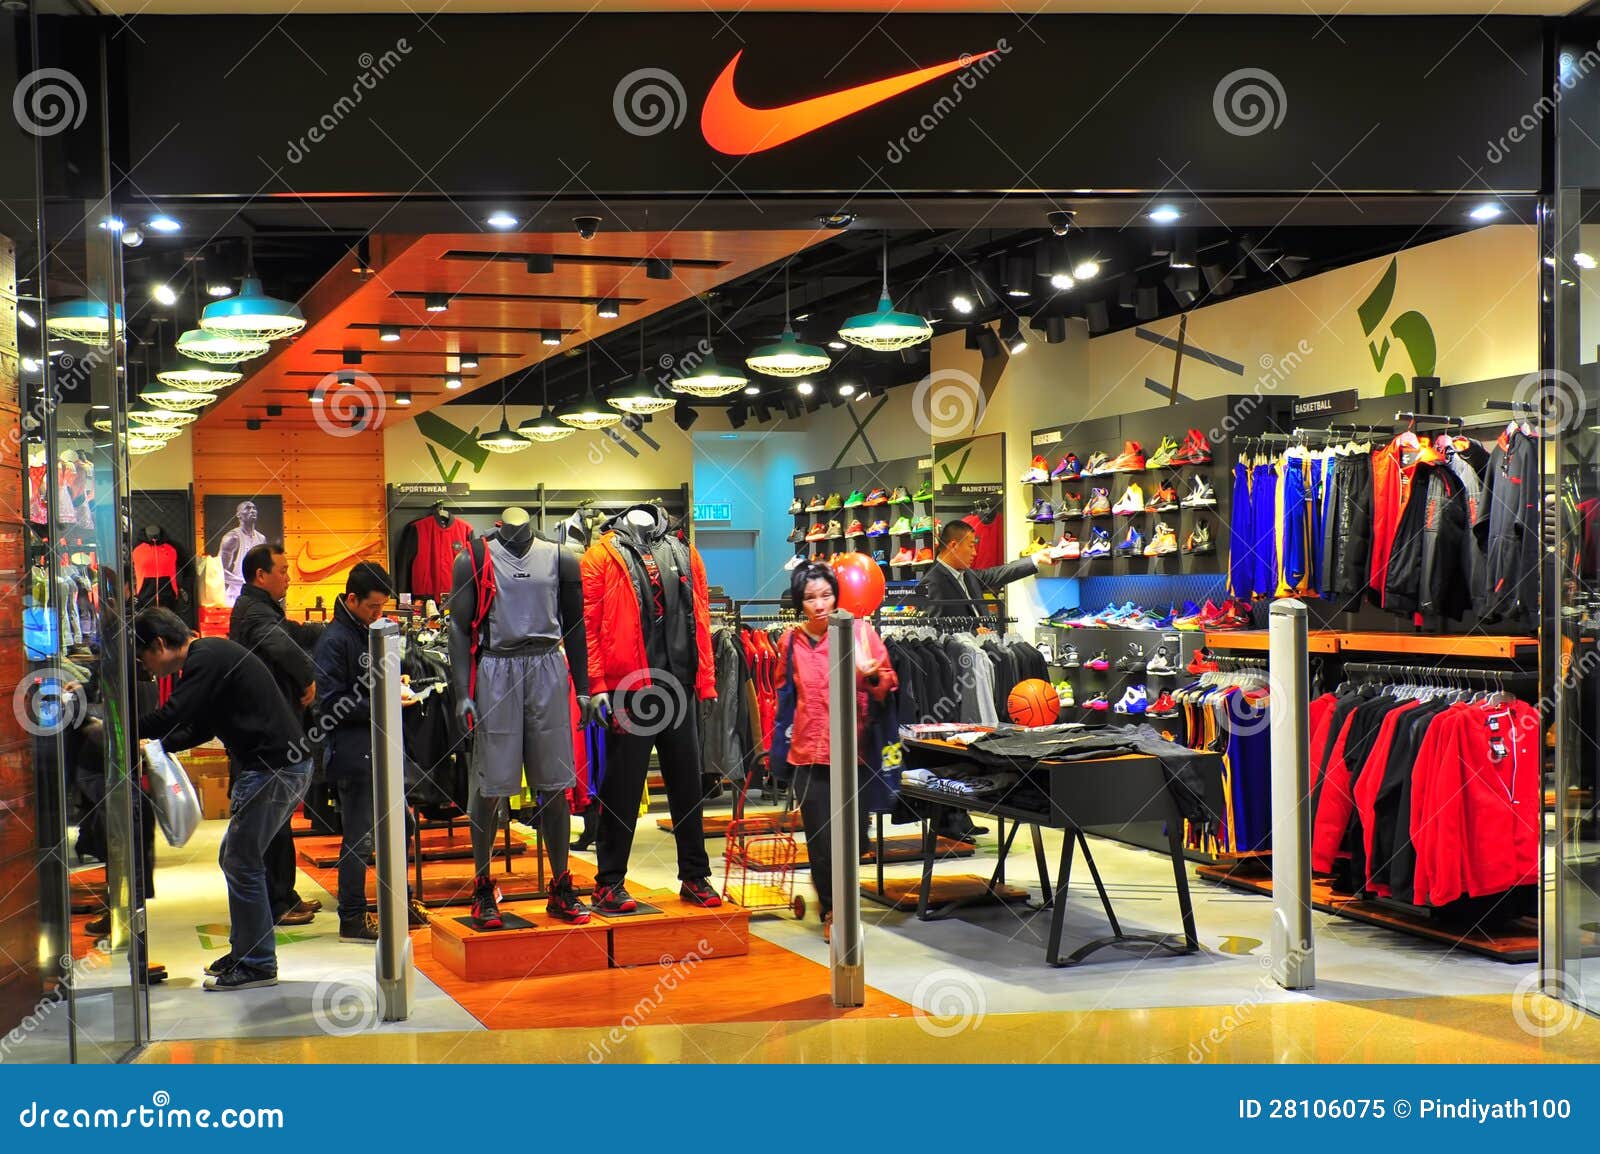 nike outlet location